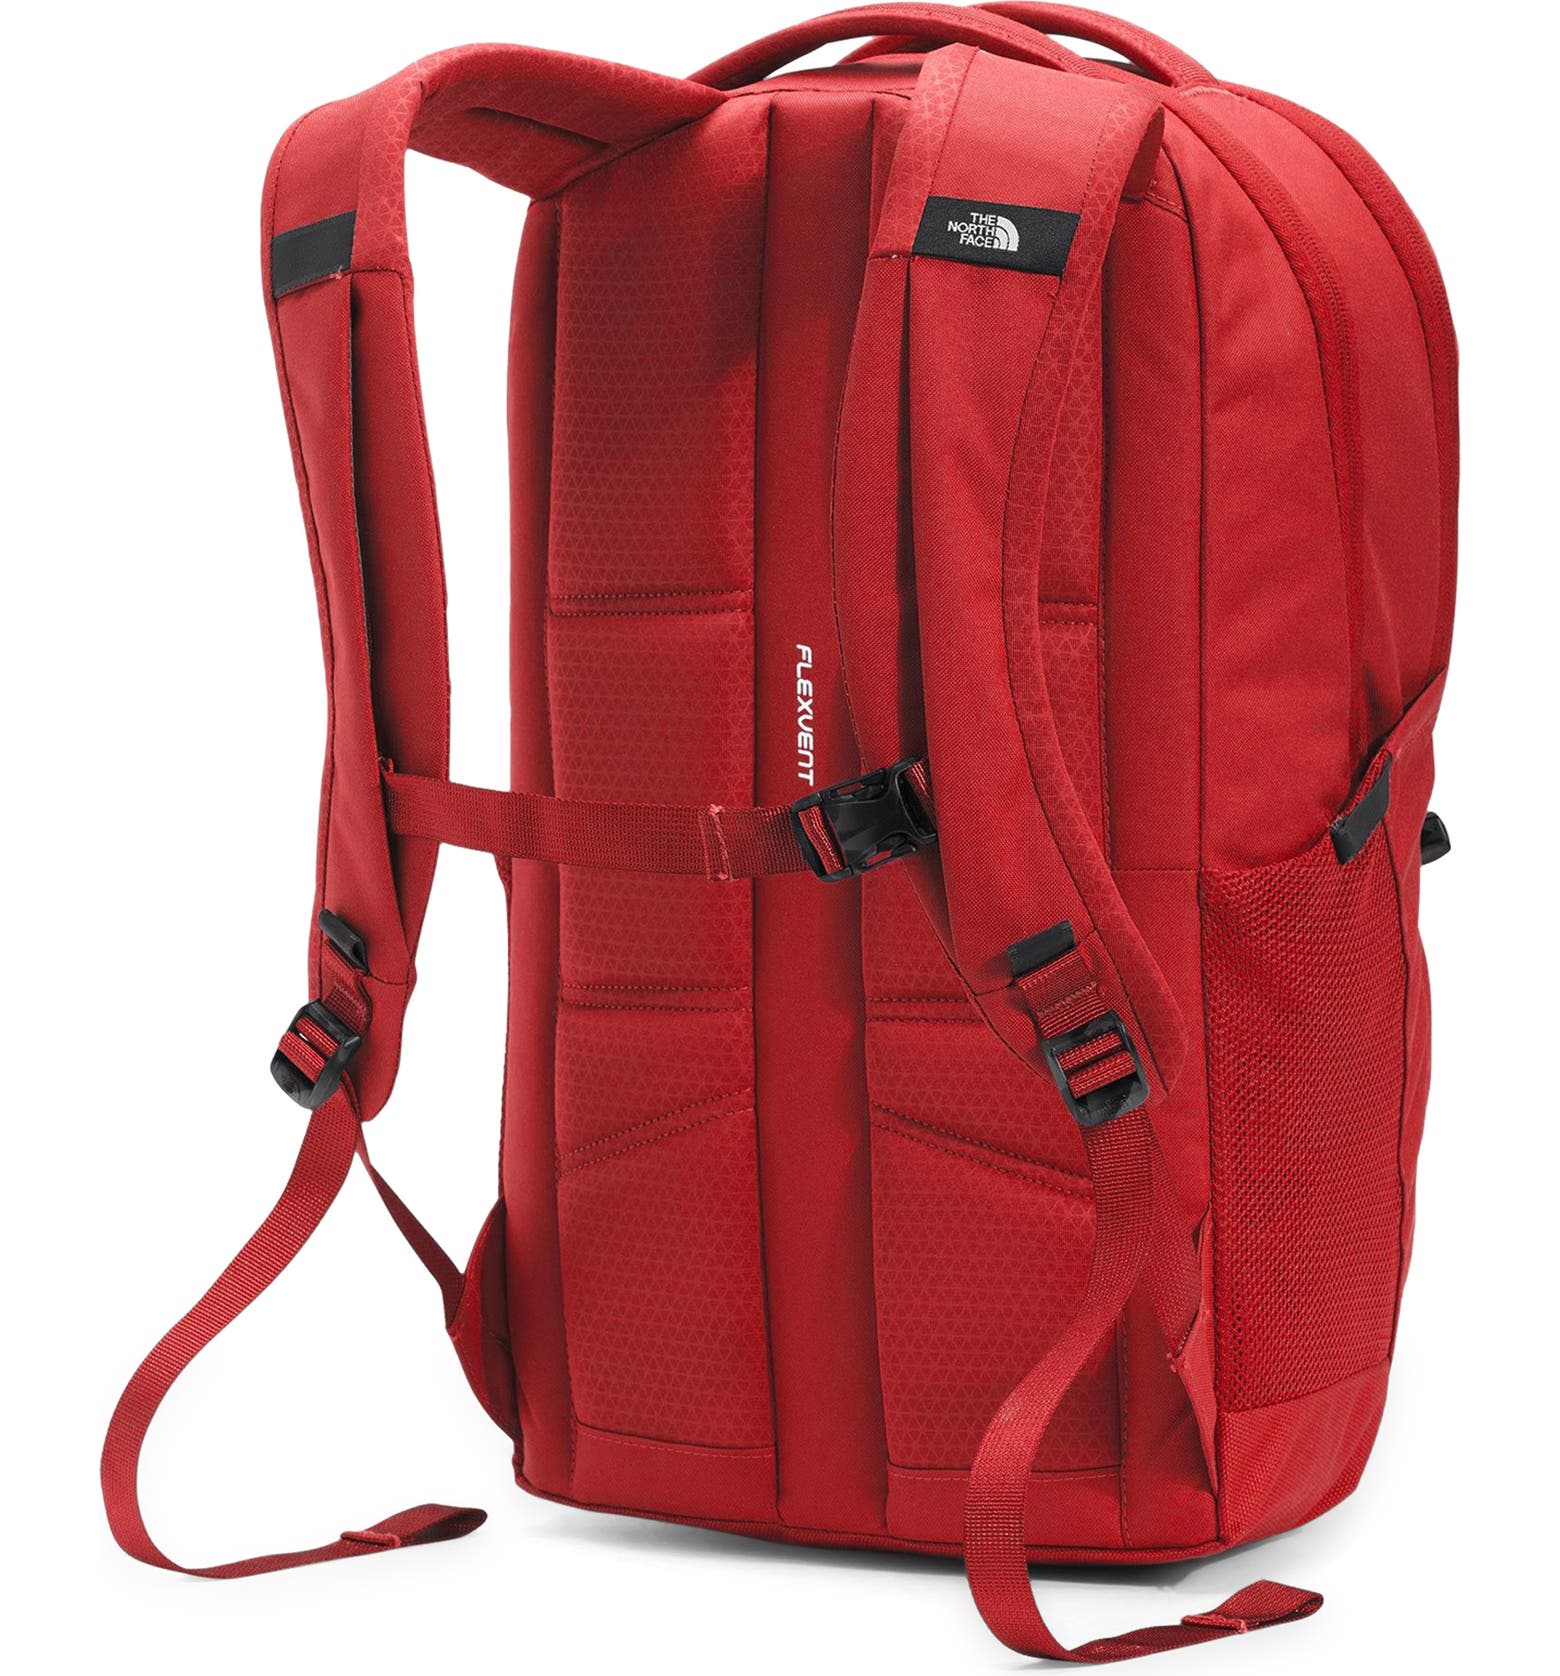 The North Face Jester Water Repellent Backpack | Nordstrom